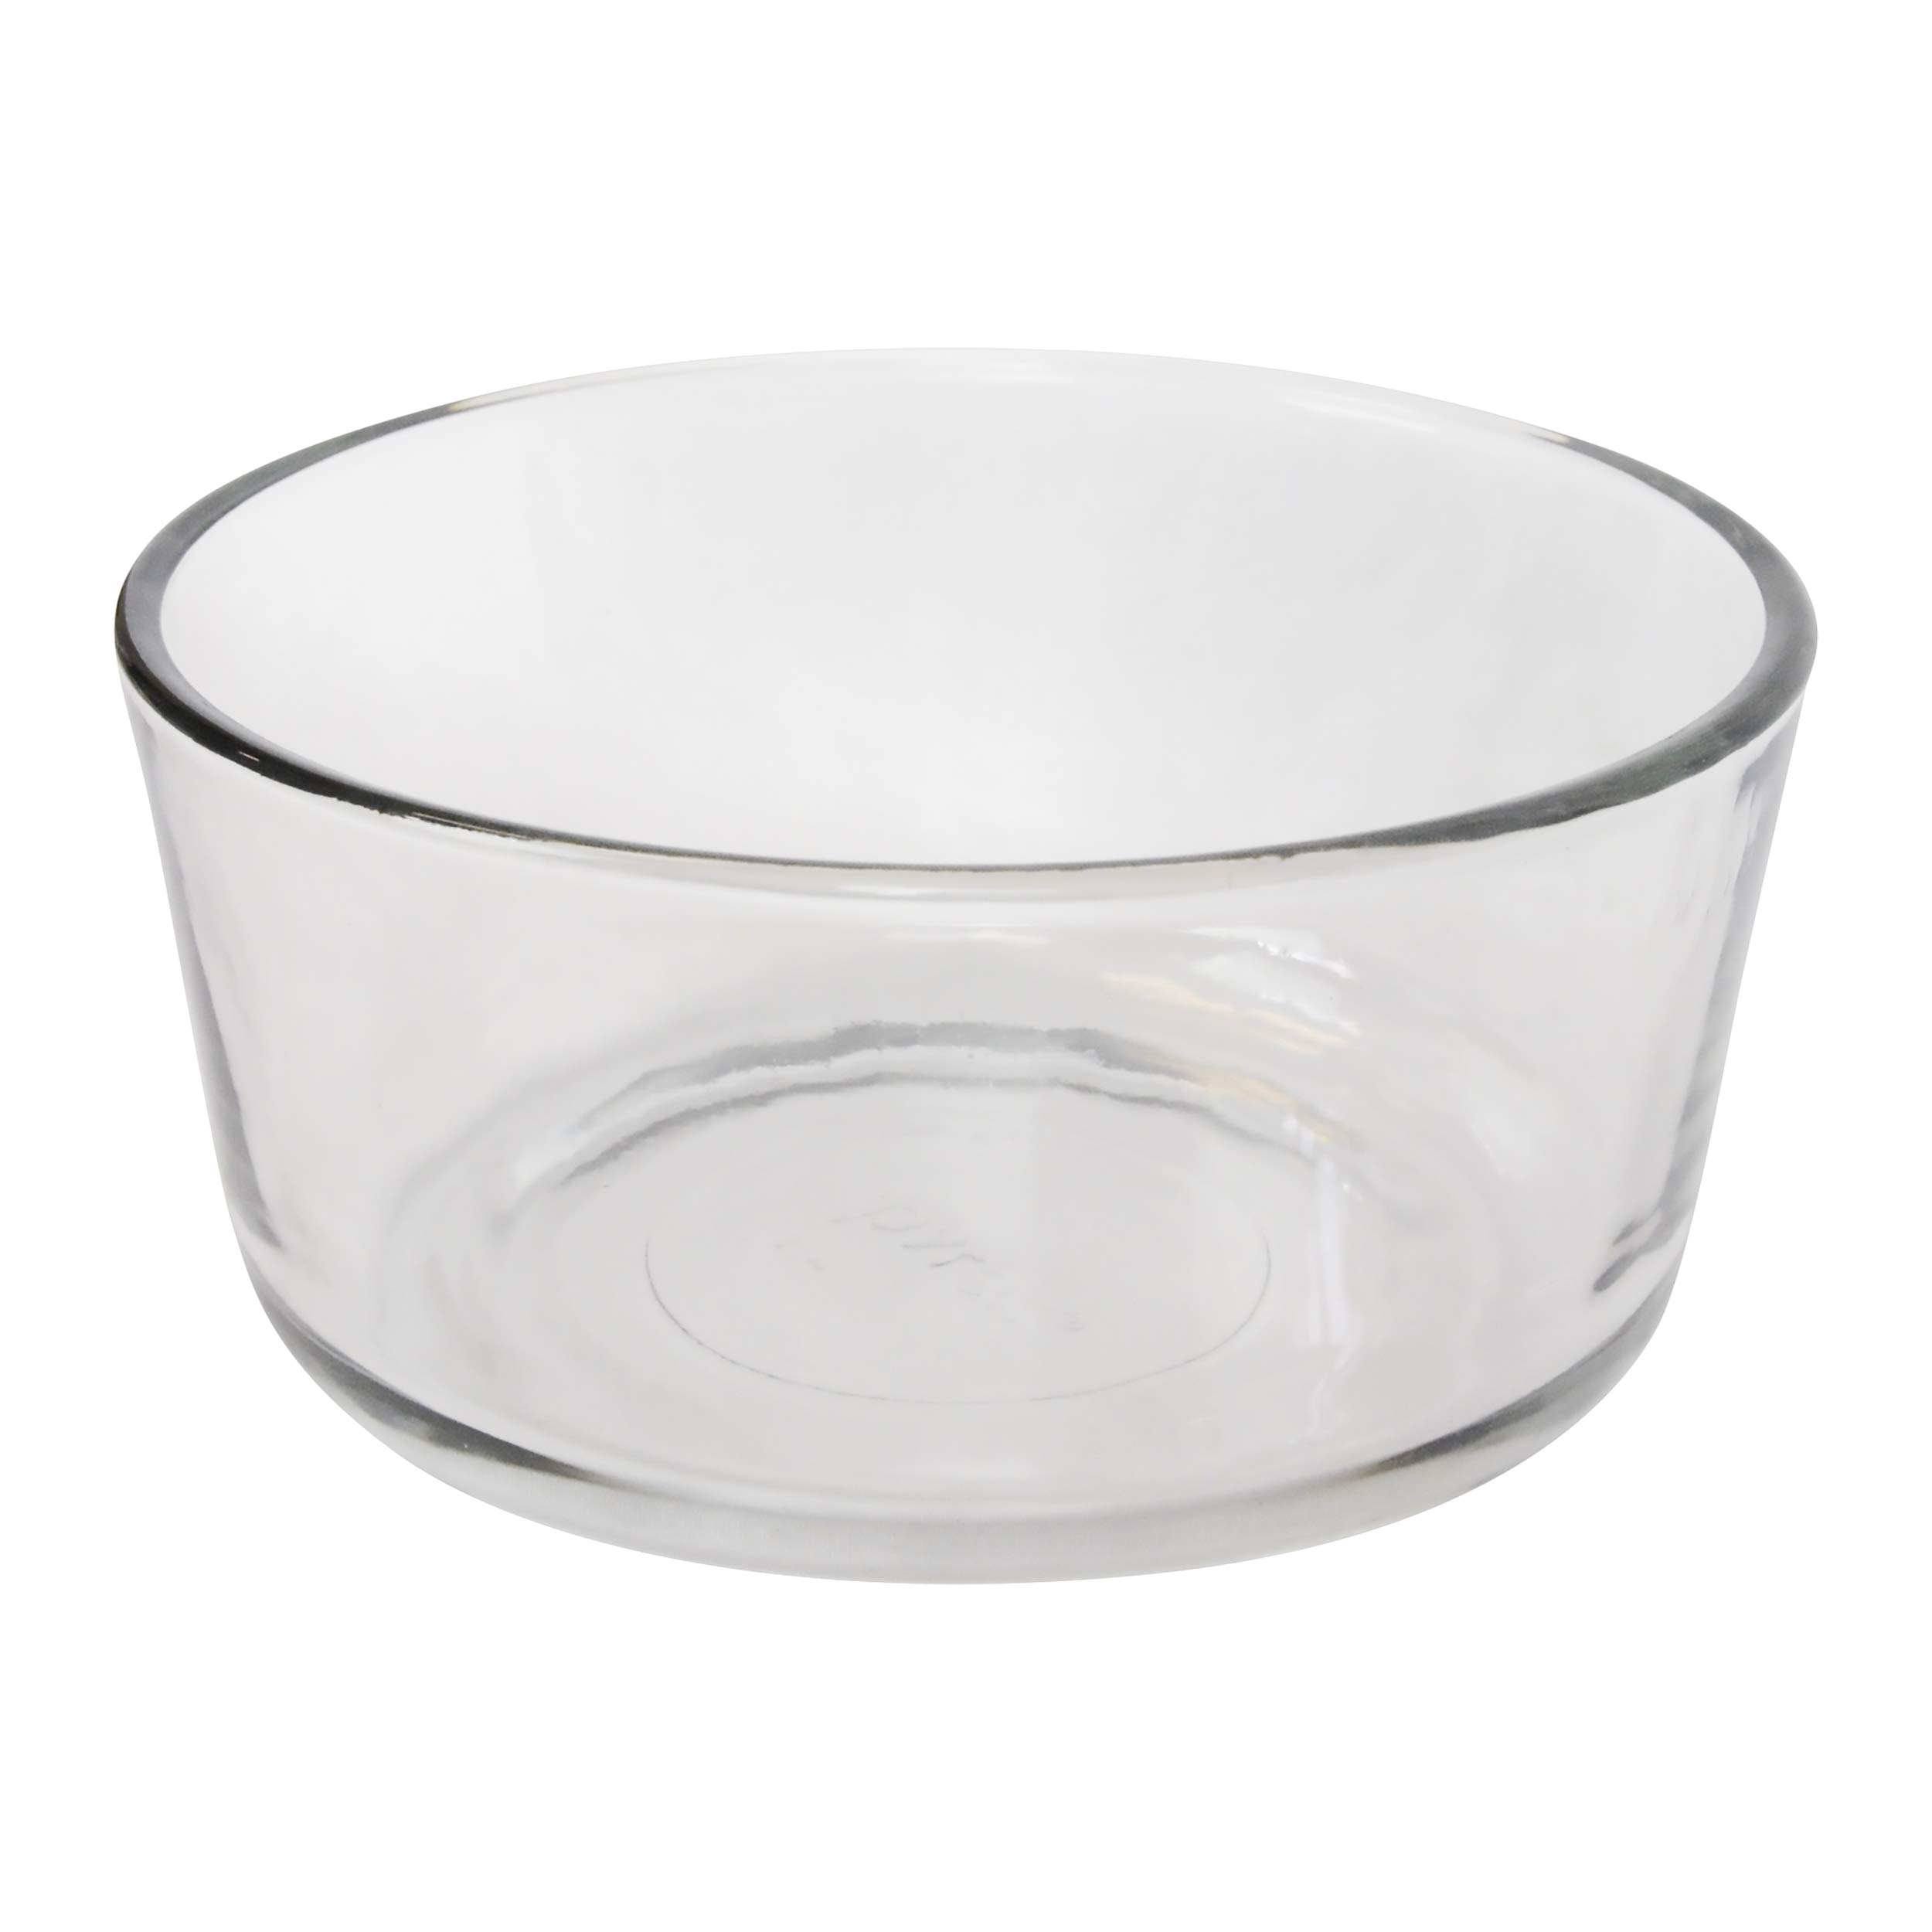 Pyrex Simply Store 7201 Round Clear Glass Storage Container - 2 Pack Made in the USA